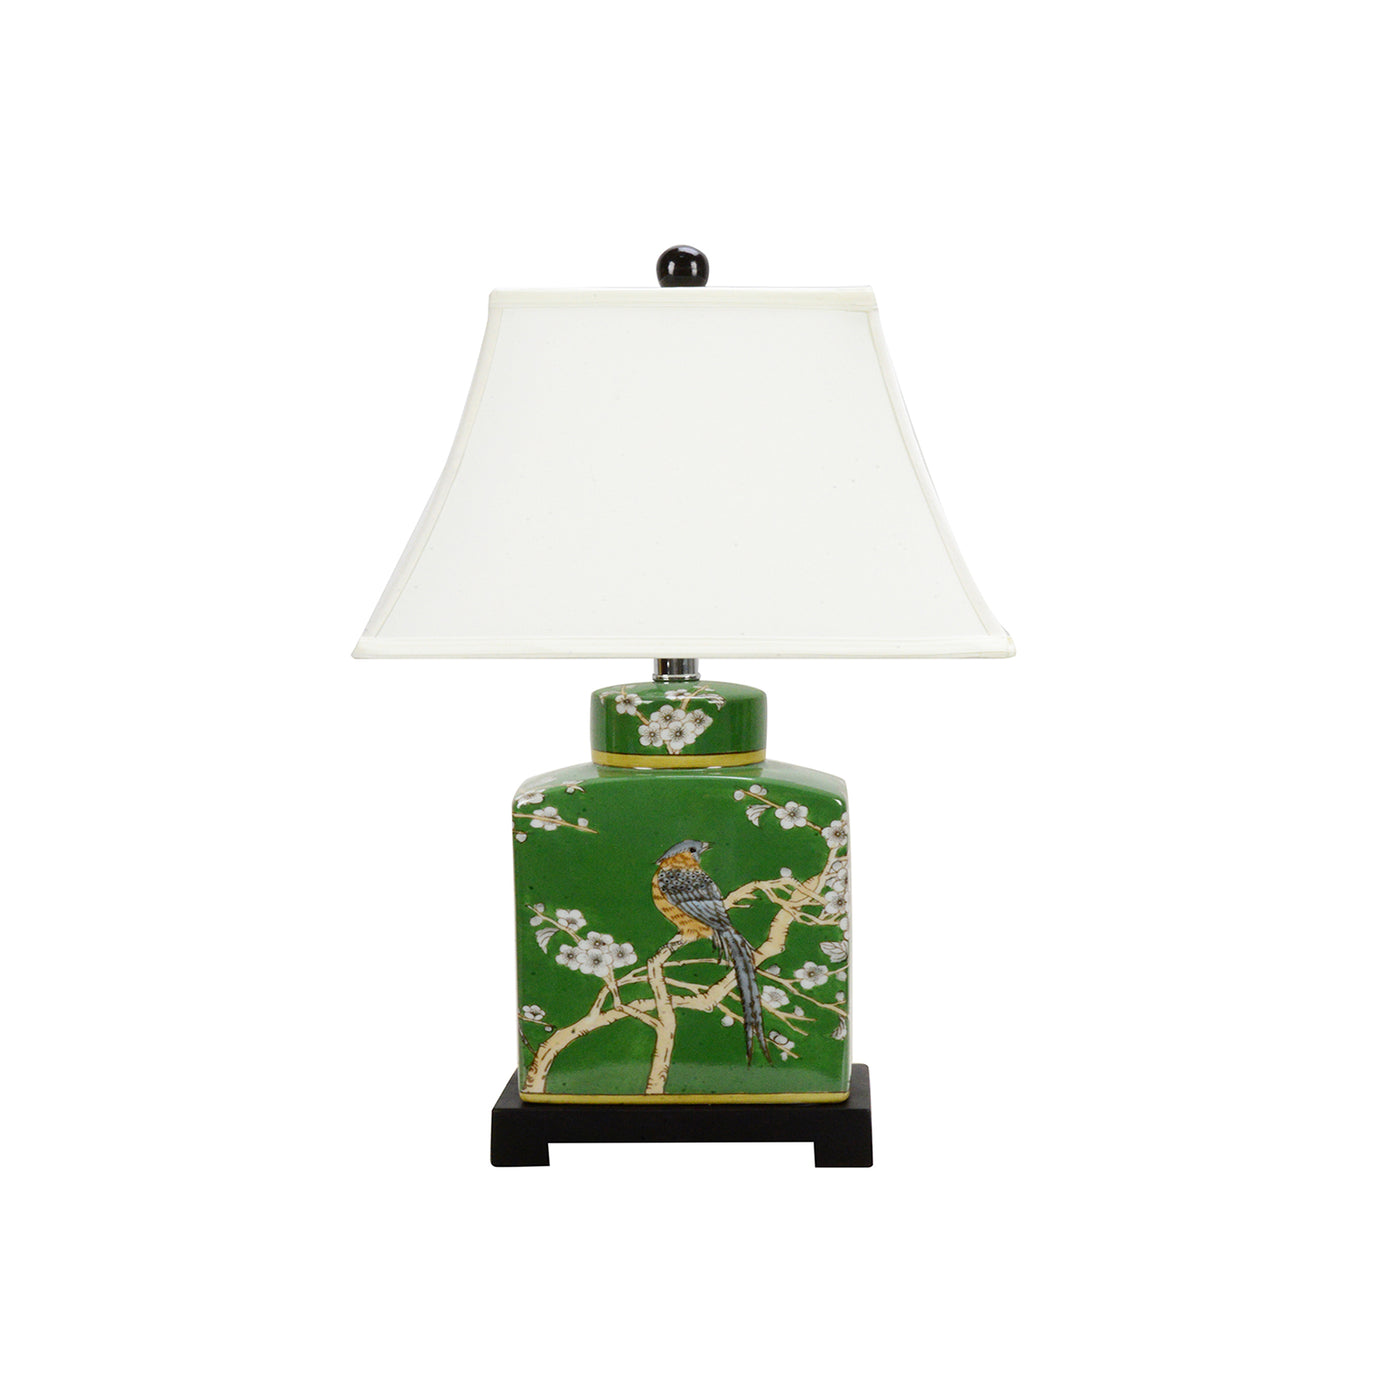 Classic bird lamp with wooden base and white shade